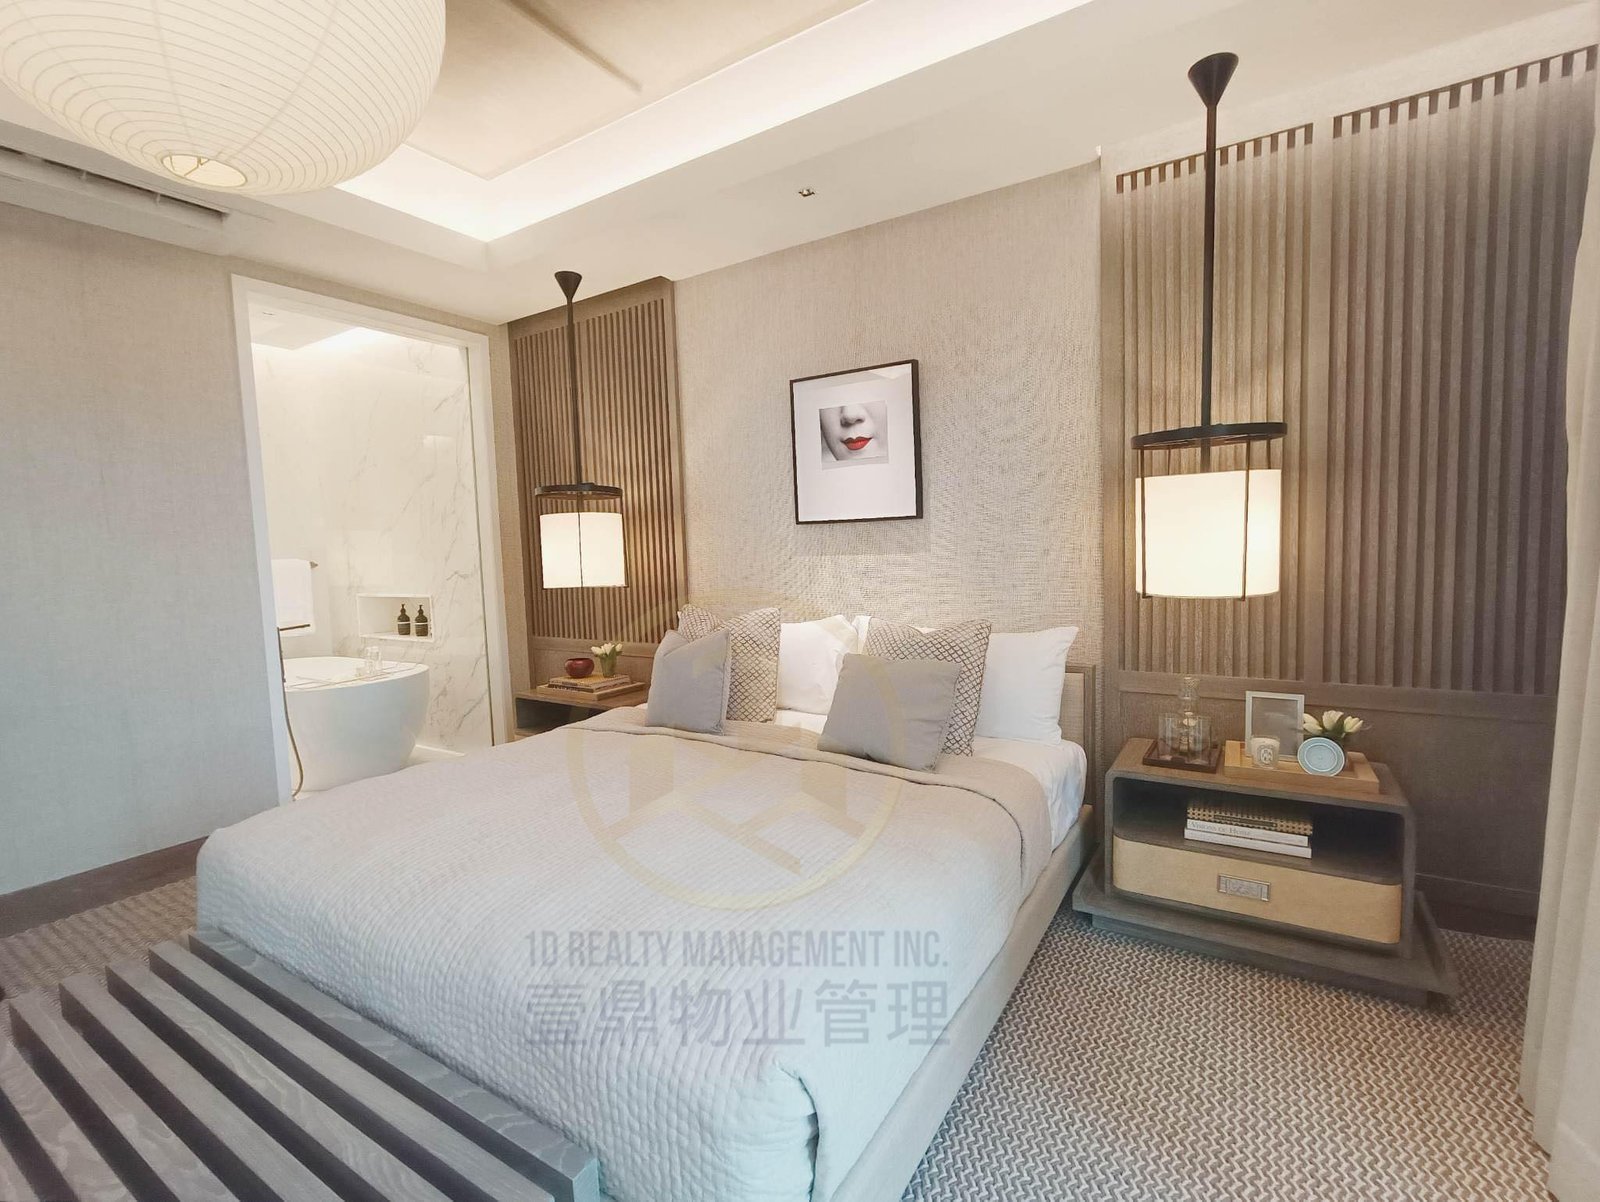 FOR SALE 3BR - The Balmori Suites - Rockwell Center, Makati City